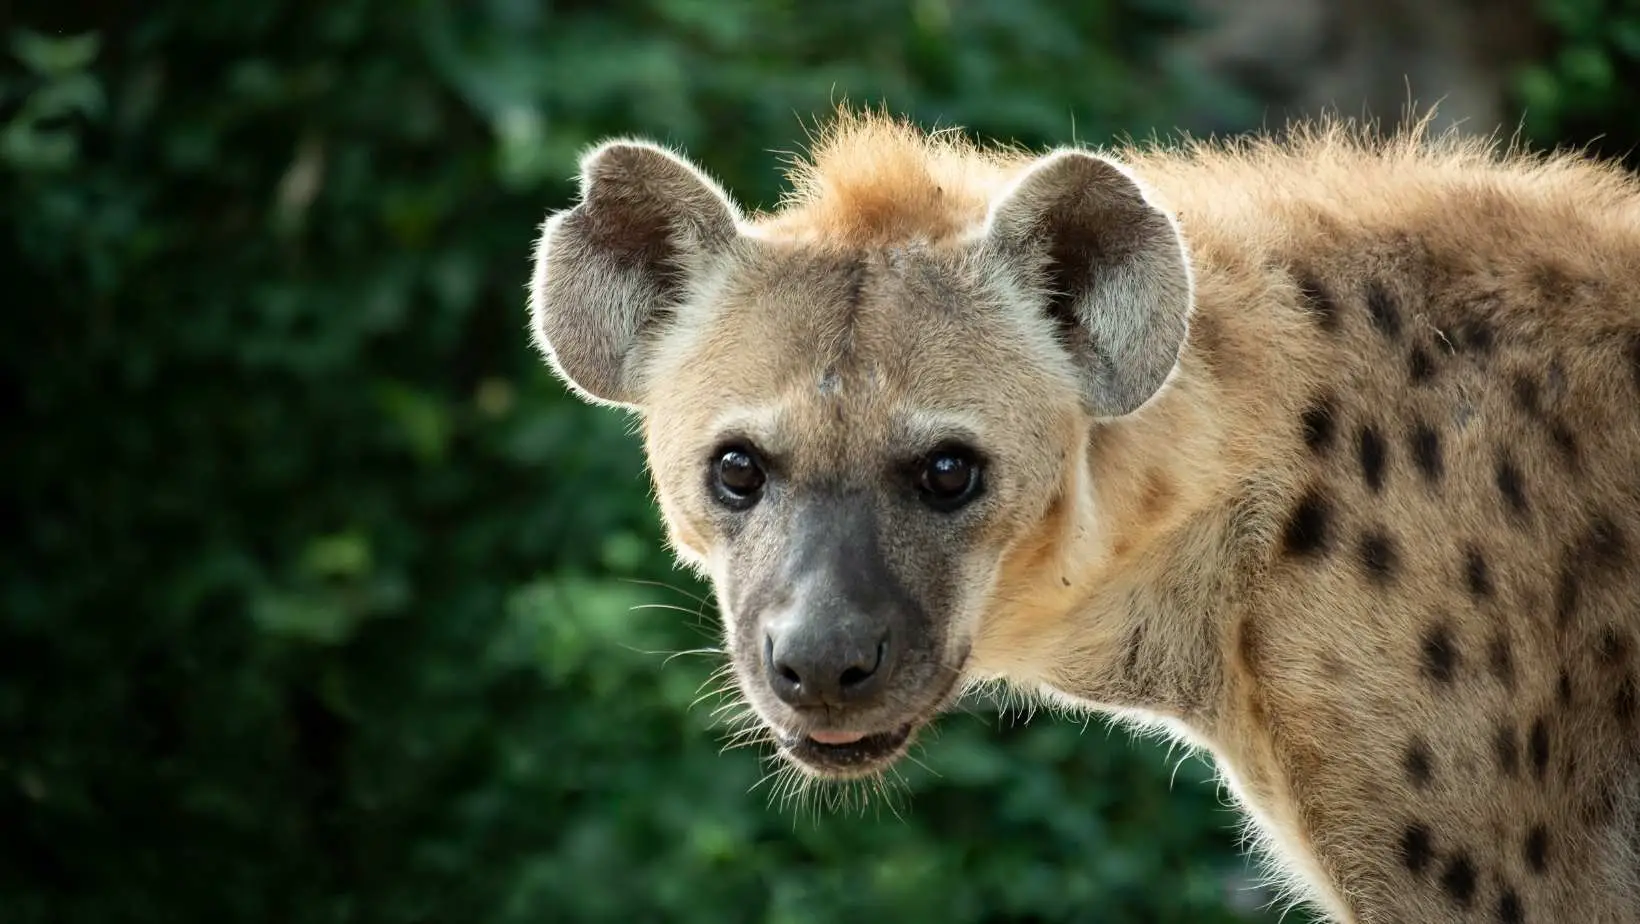 Are Hyenas Cats Or Dogs?